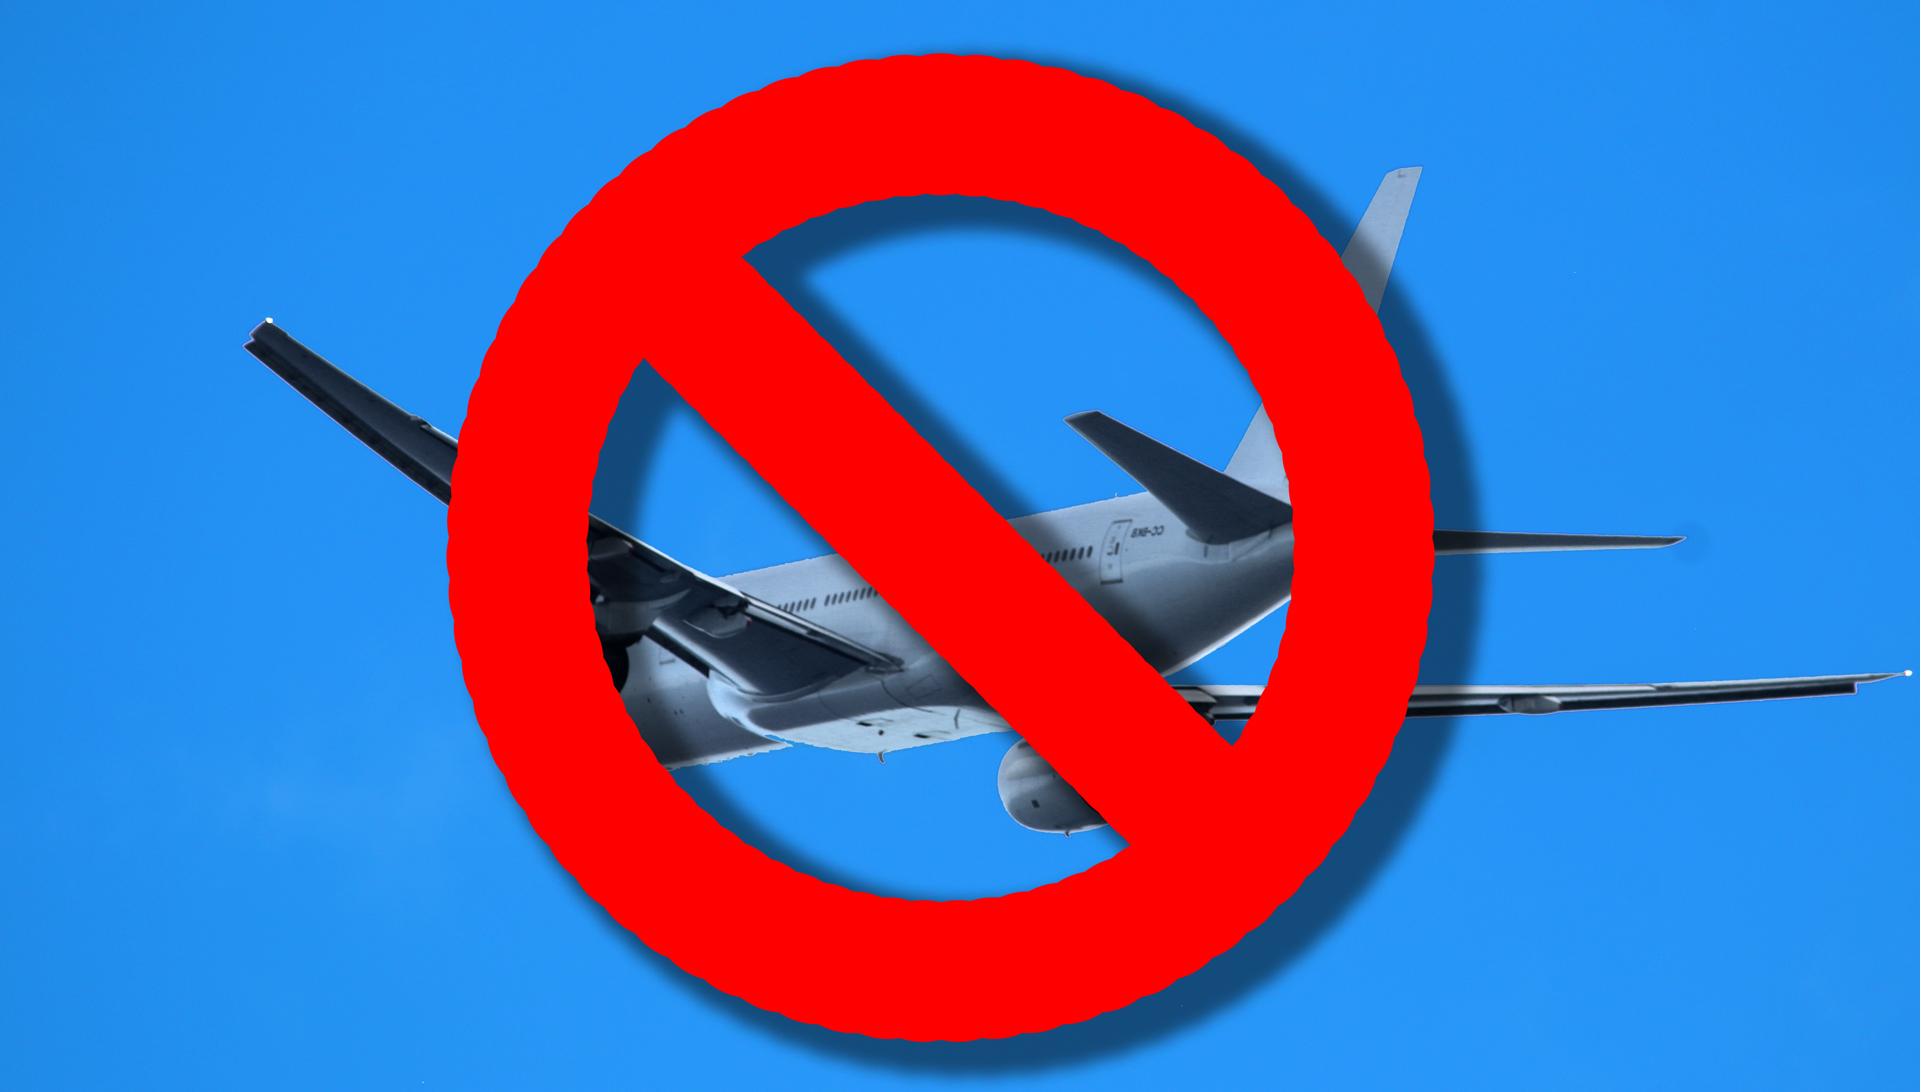 a no plane sign with a red circle around it